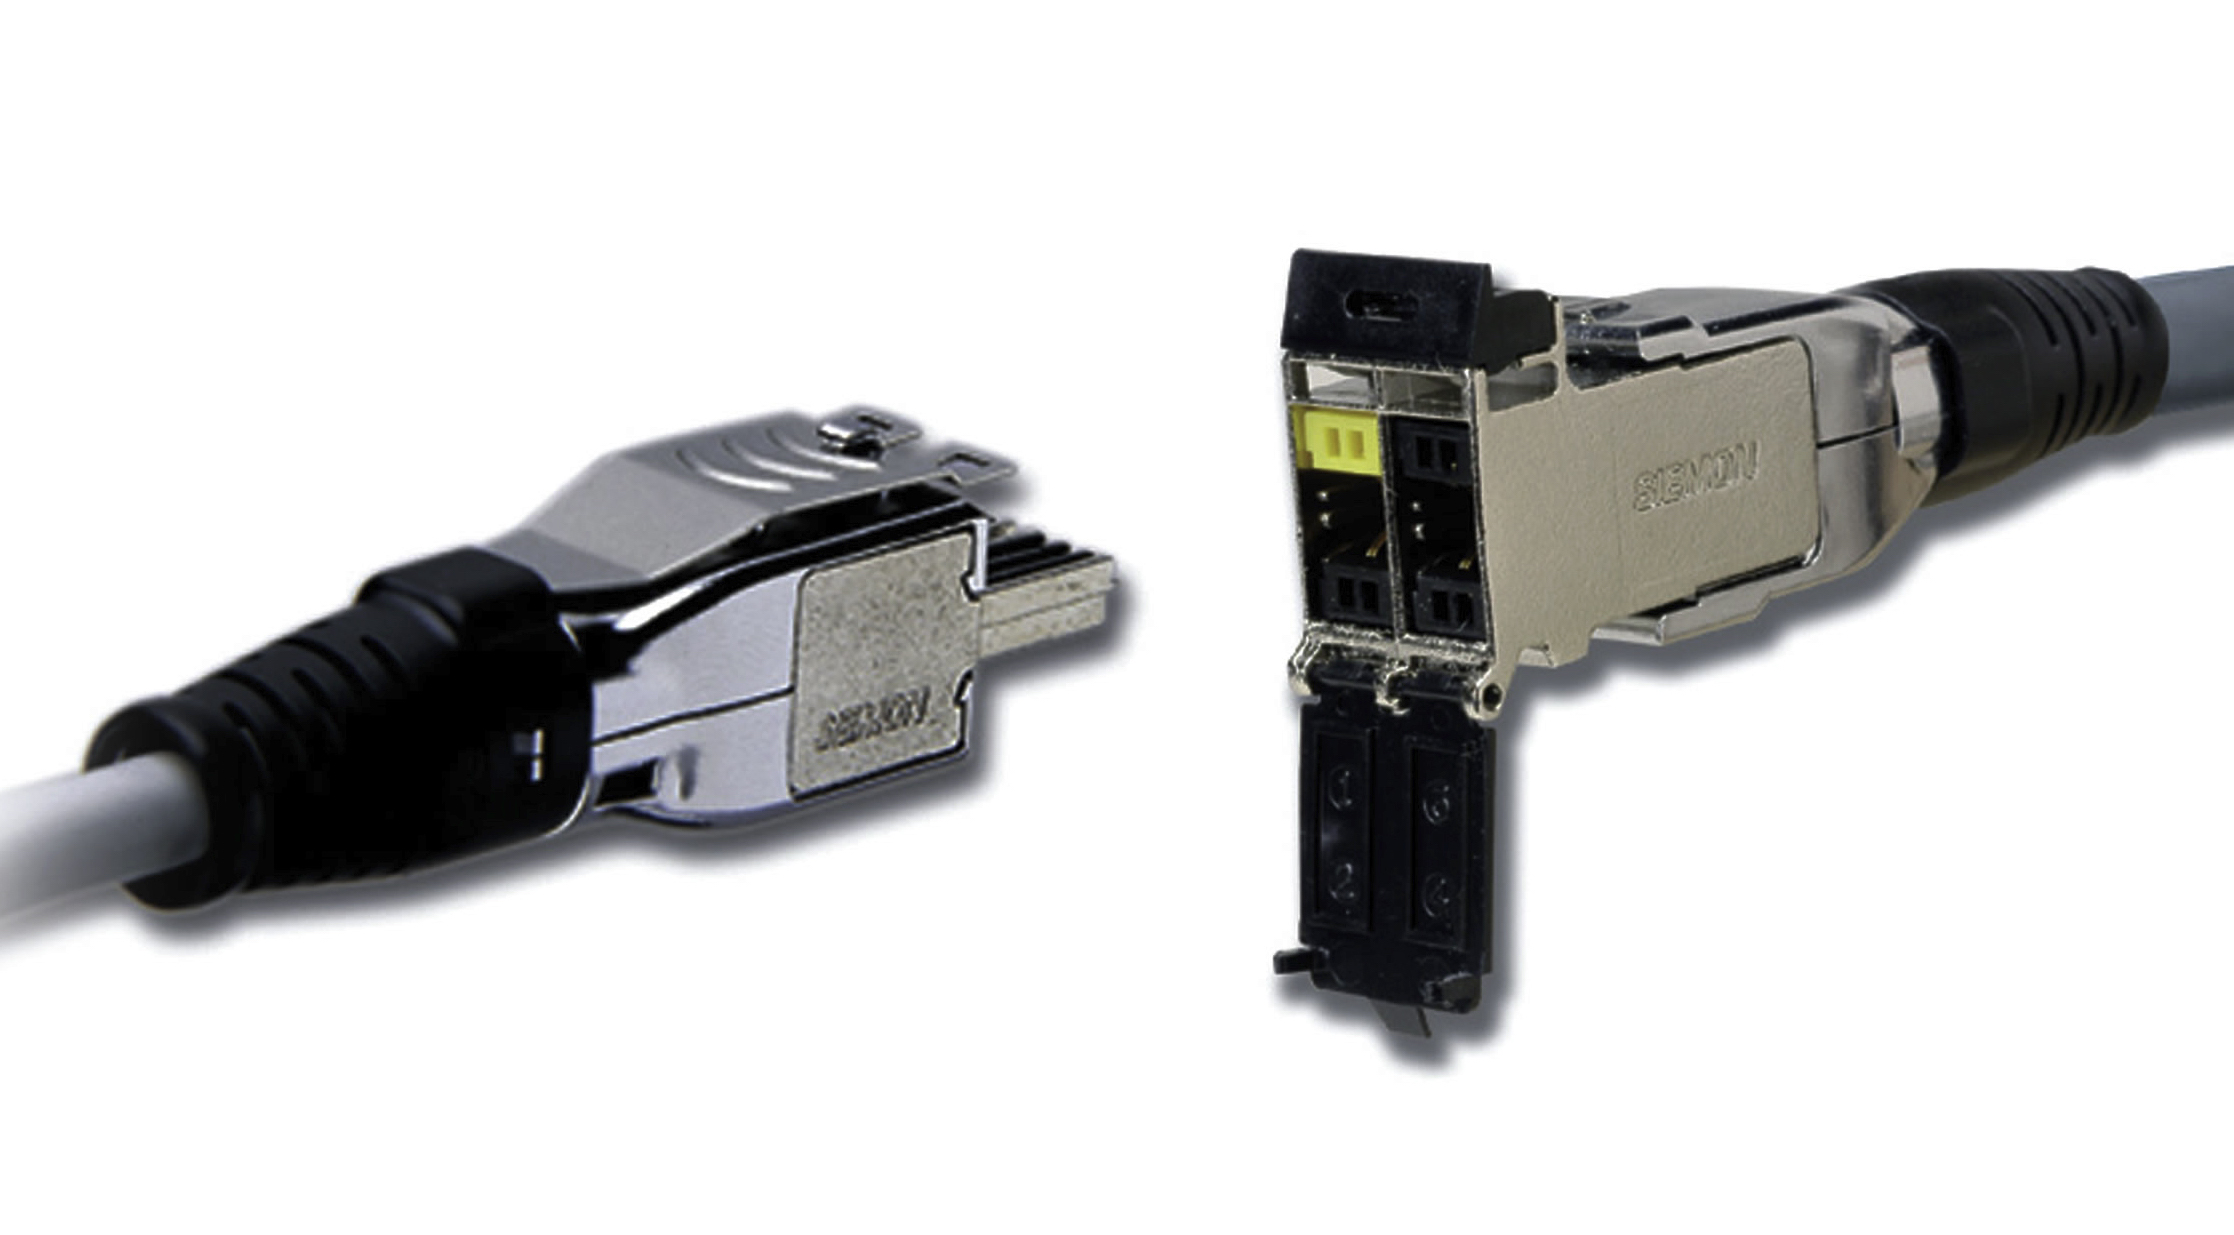 Siemon TERA outlets for secure networks